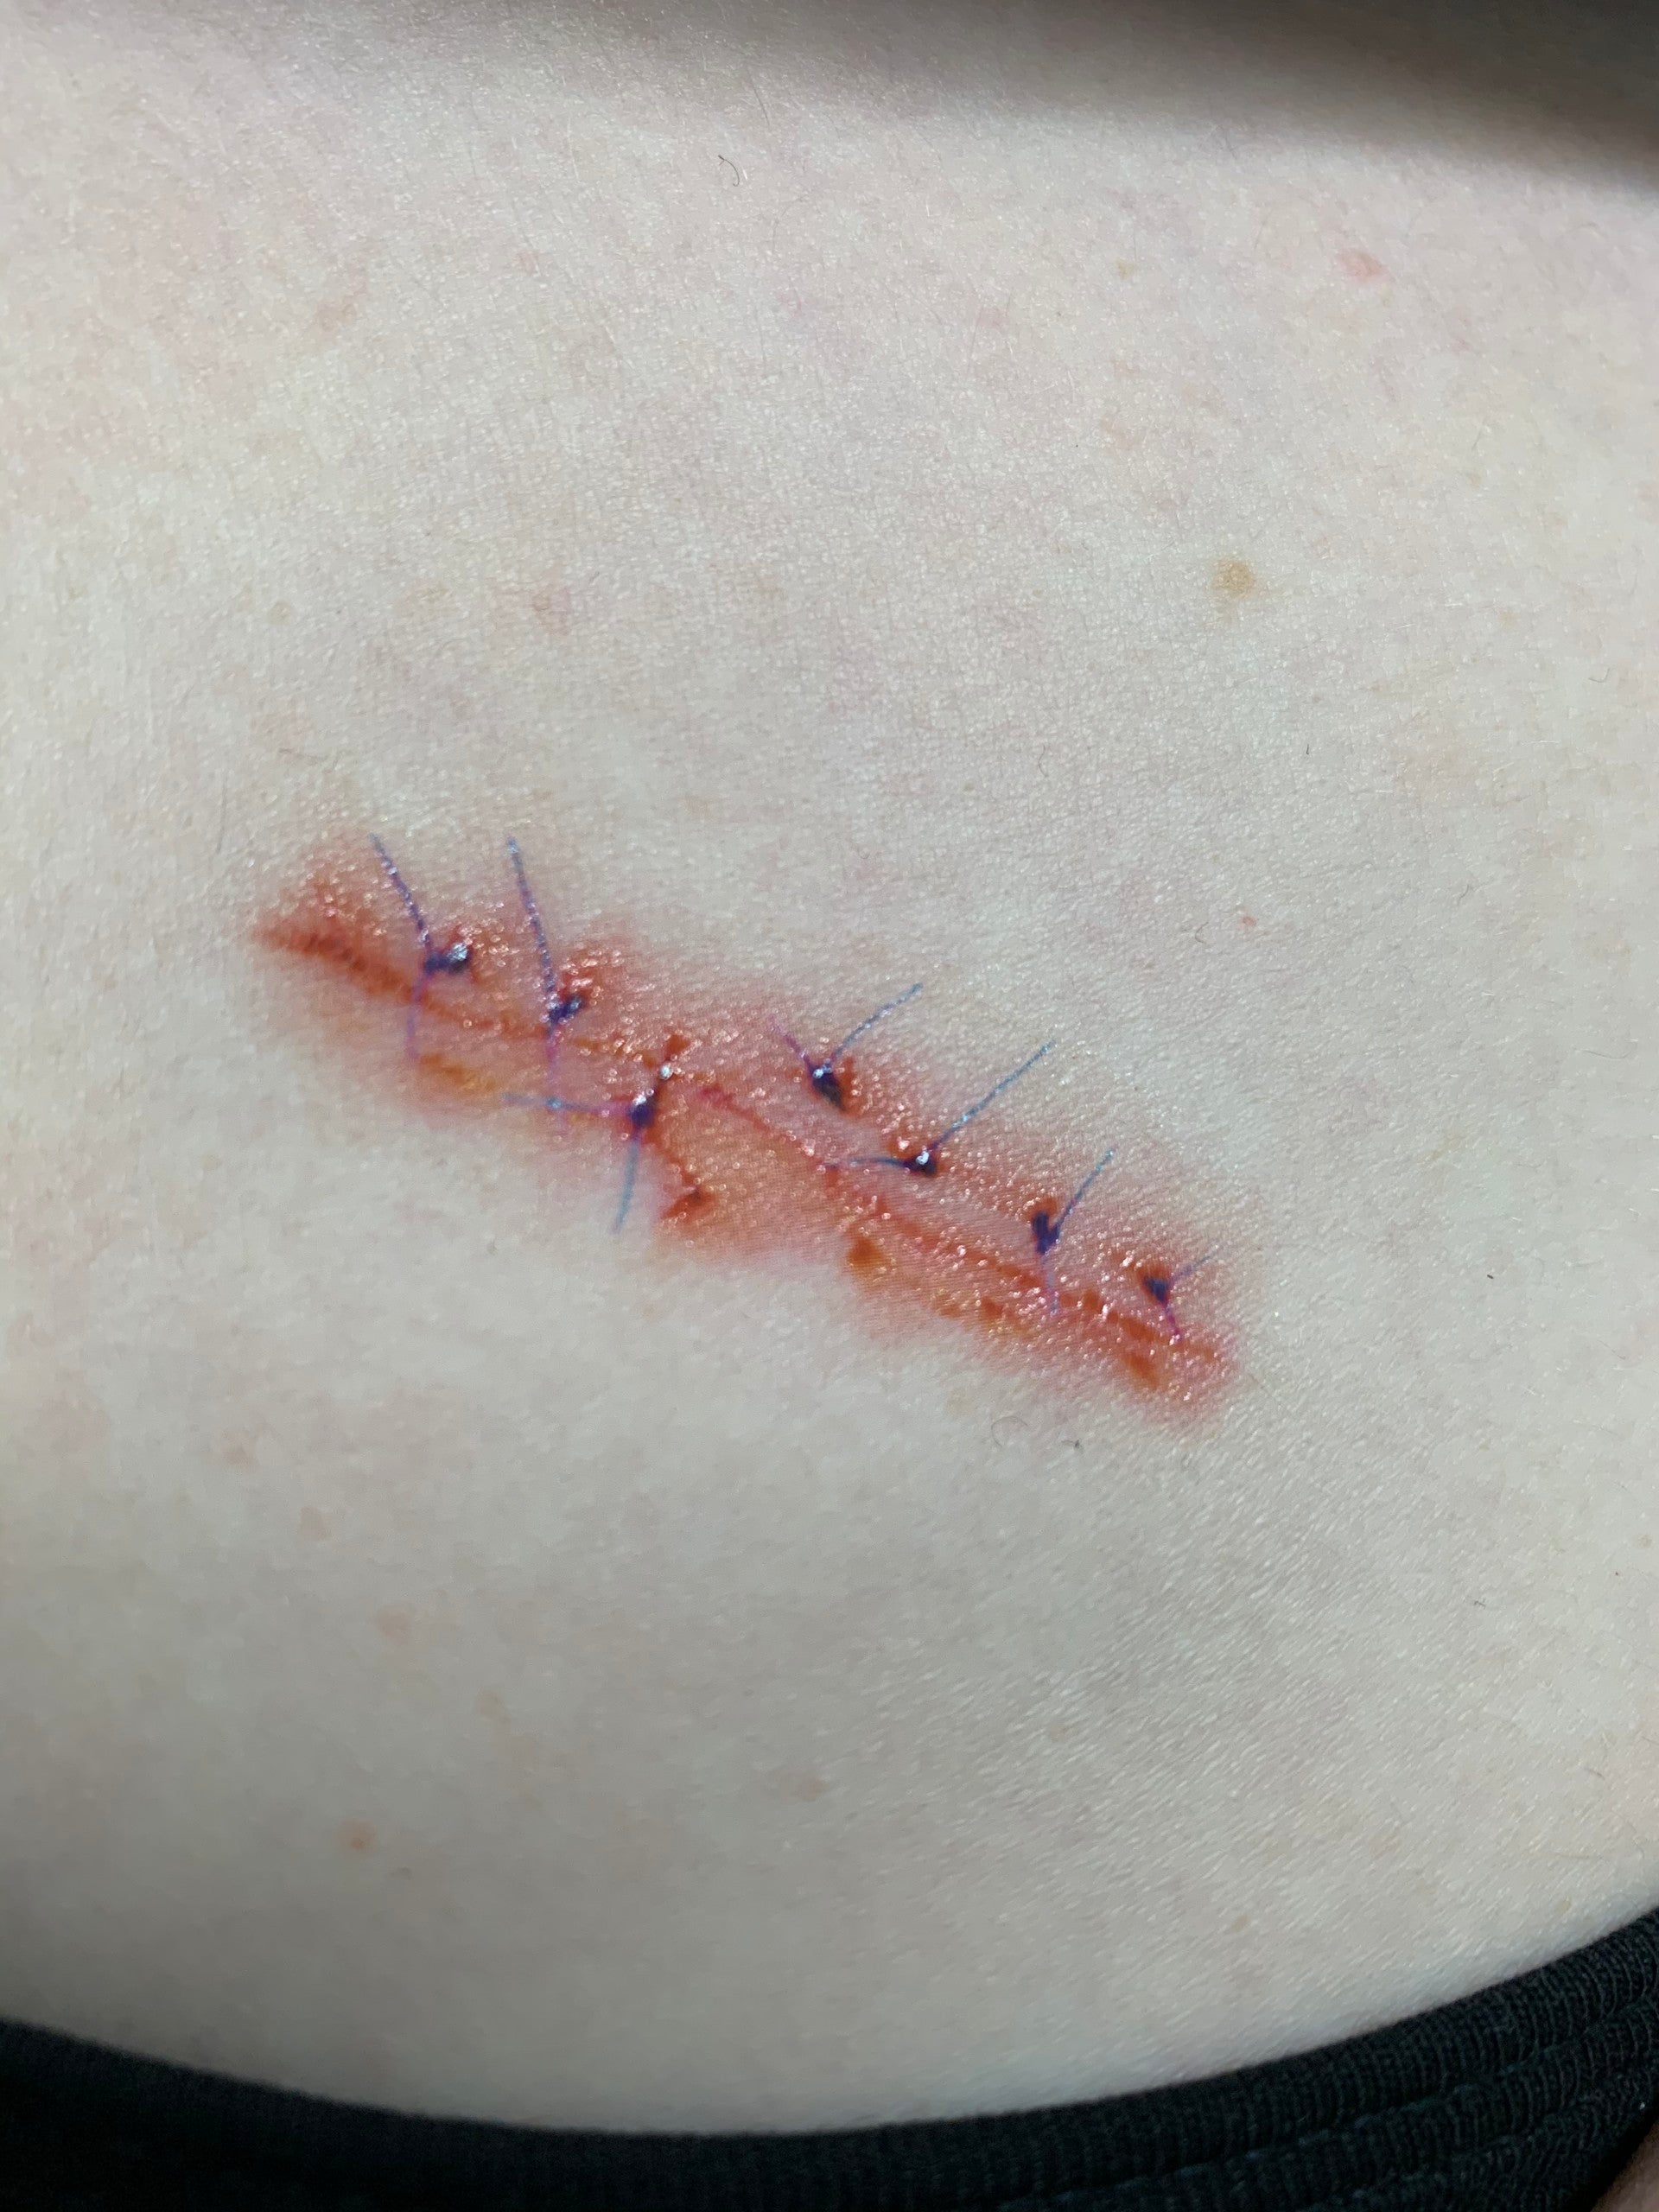 Scars and Sutures A- Scars and Sutures A